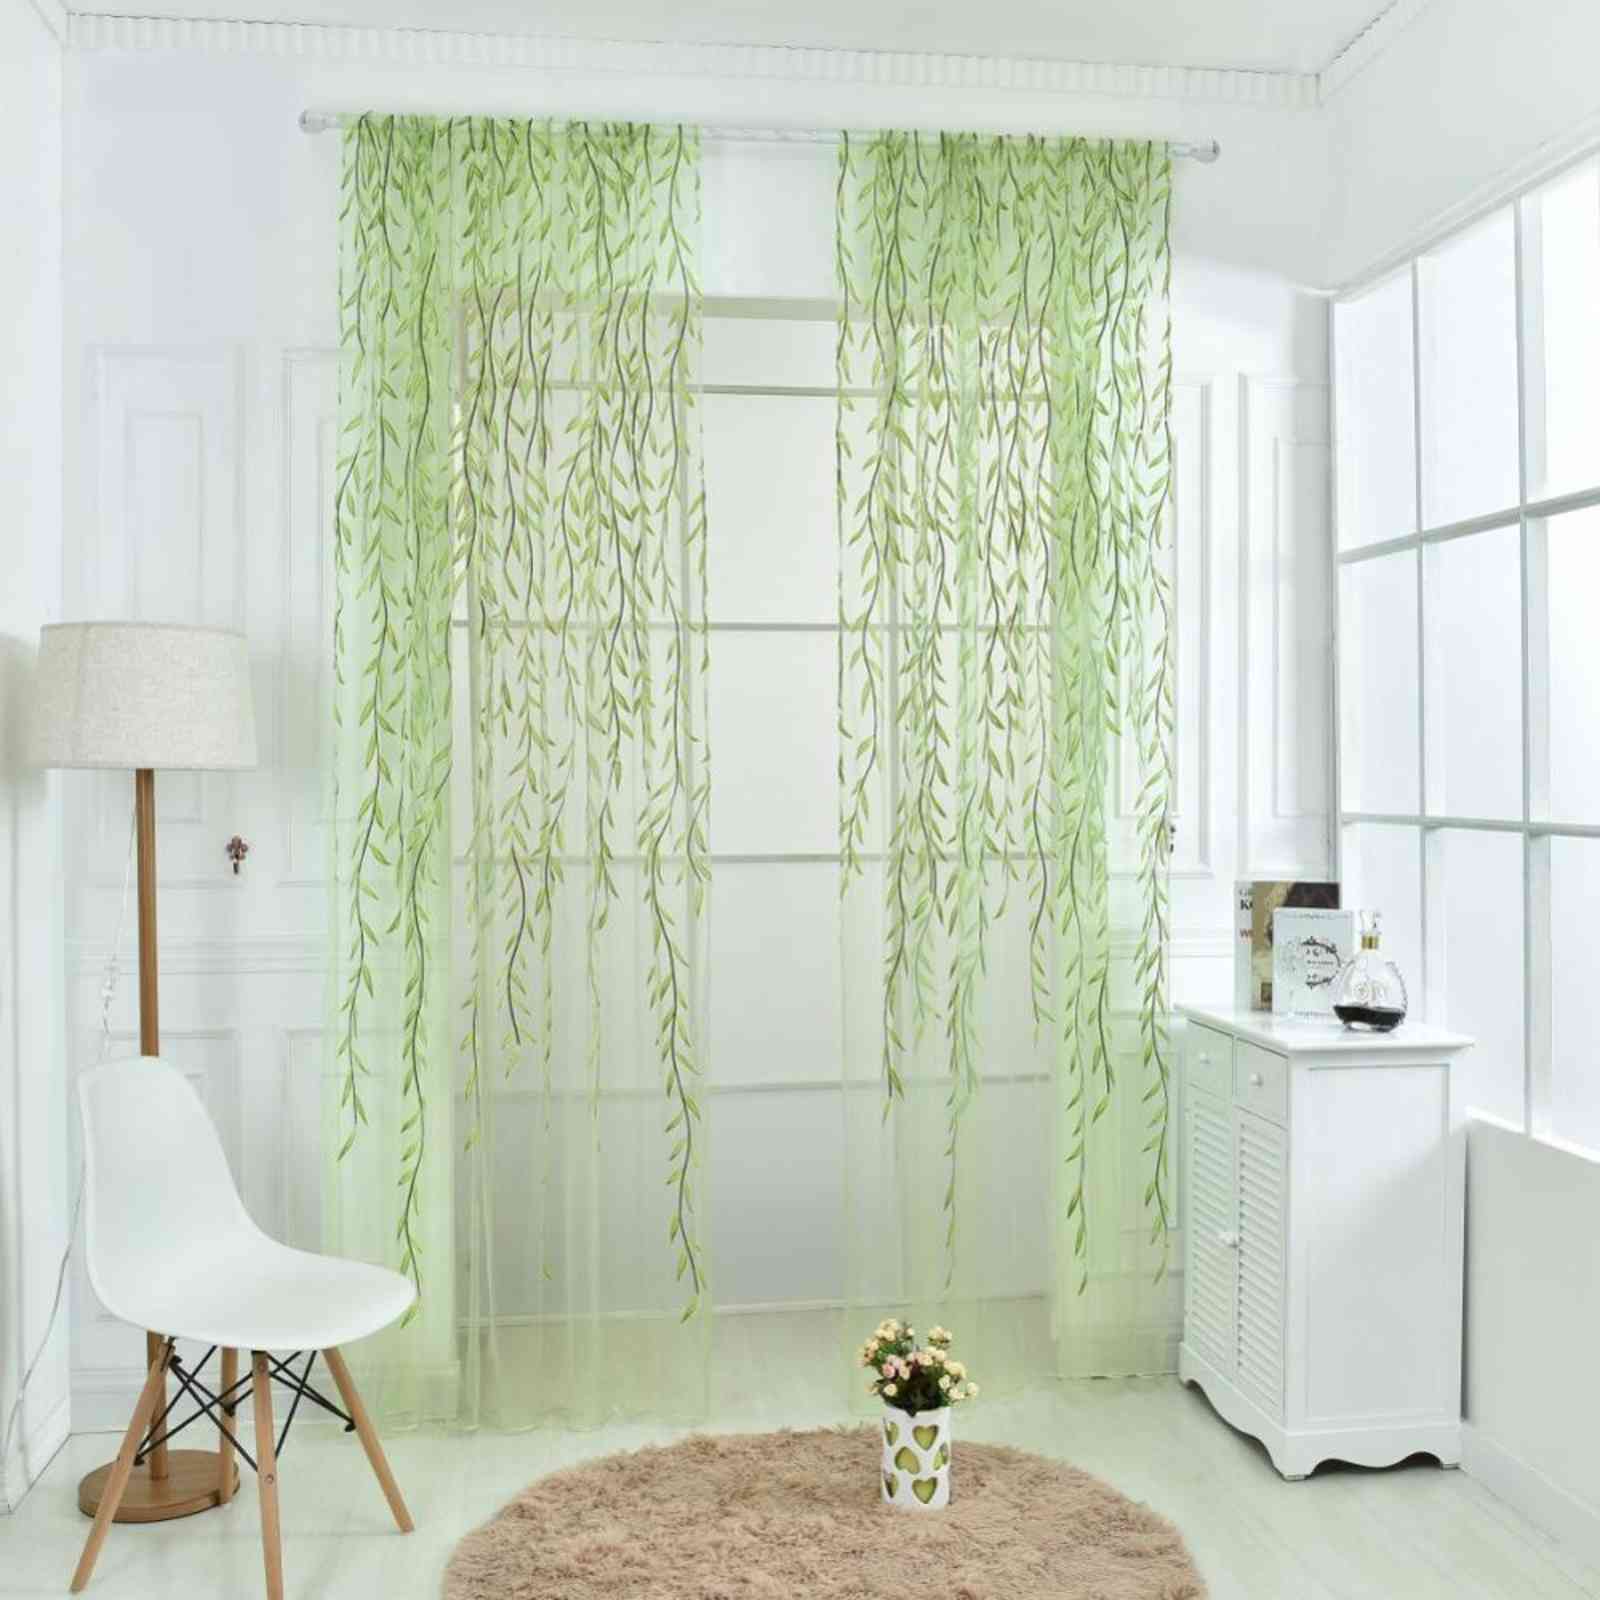 

Wicker Sheer Curtain French Window Pastoral Style Flowers Printed Gauze Curtains Screen for Living Room Bedroom Home Decoration, Green